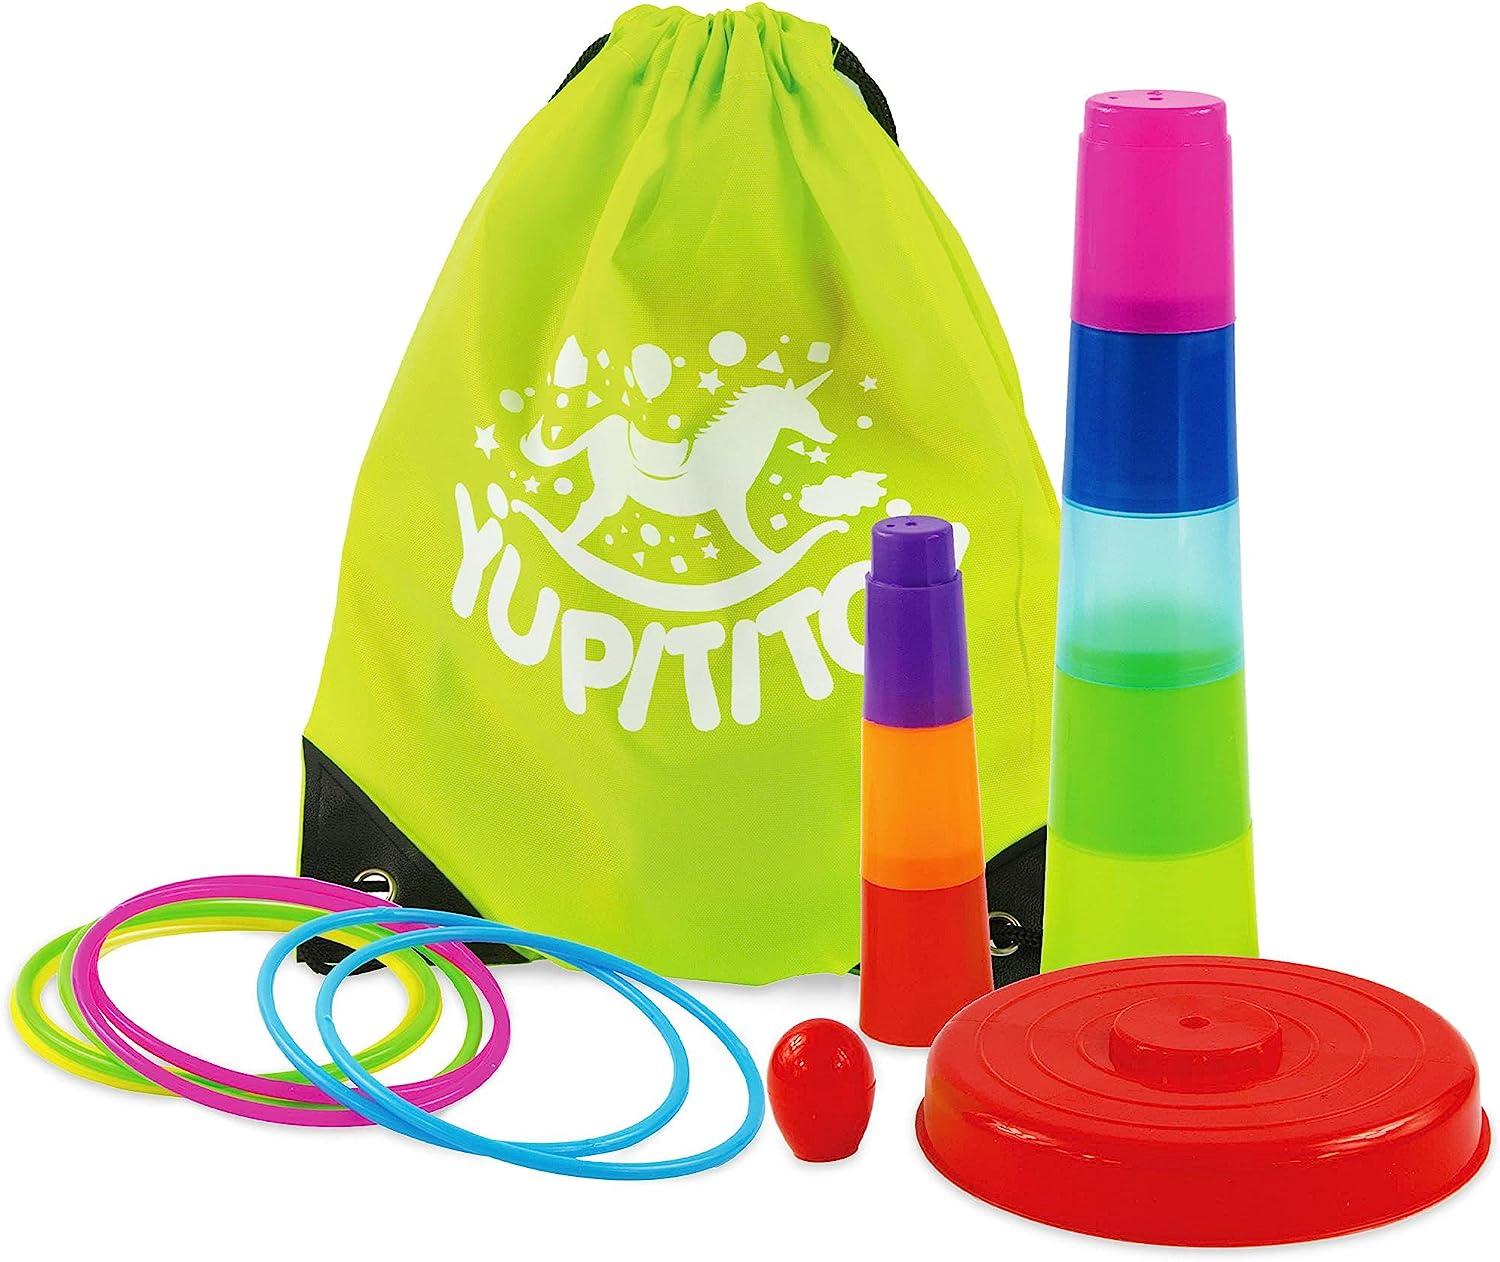 Cone Ring Toss Game for Kids with 8 Throwing Rings and Travel Bag, Colorful  Tossing and Active Play Set, Quick Setup for Indoor and Outdoor Use,  Heavy-Duty Plastic